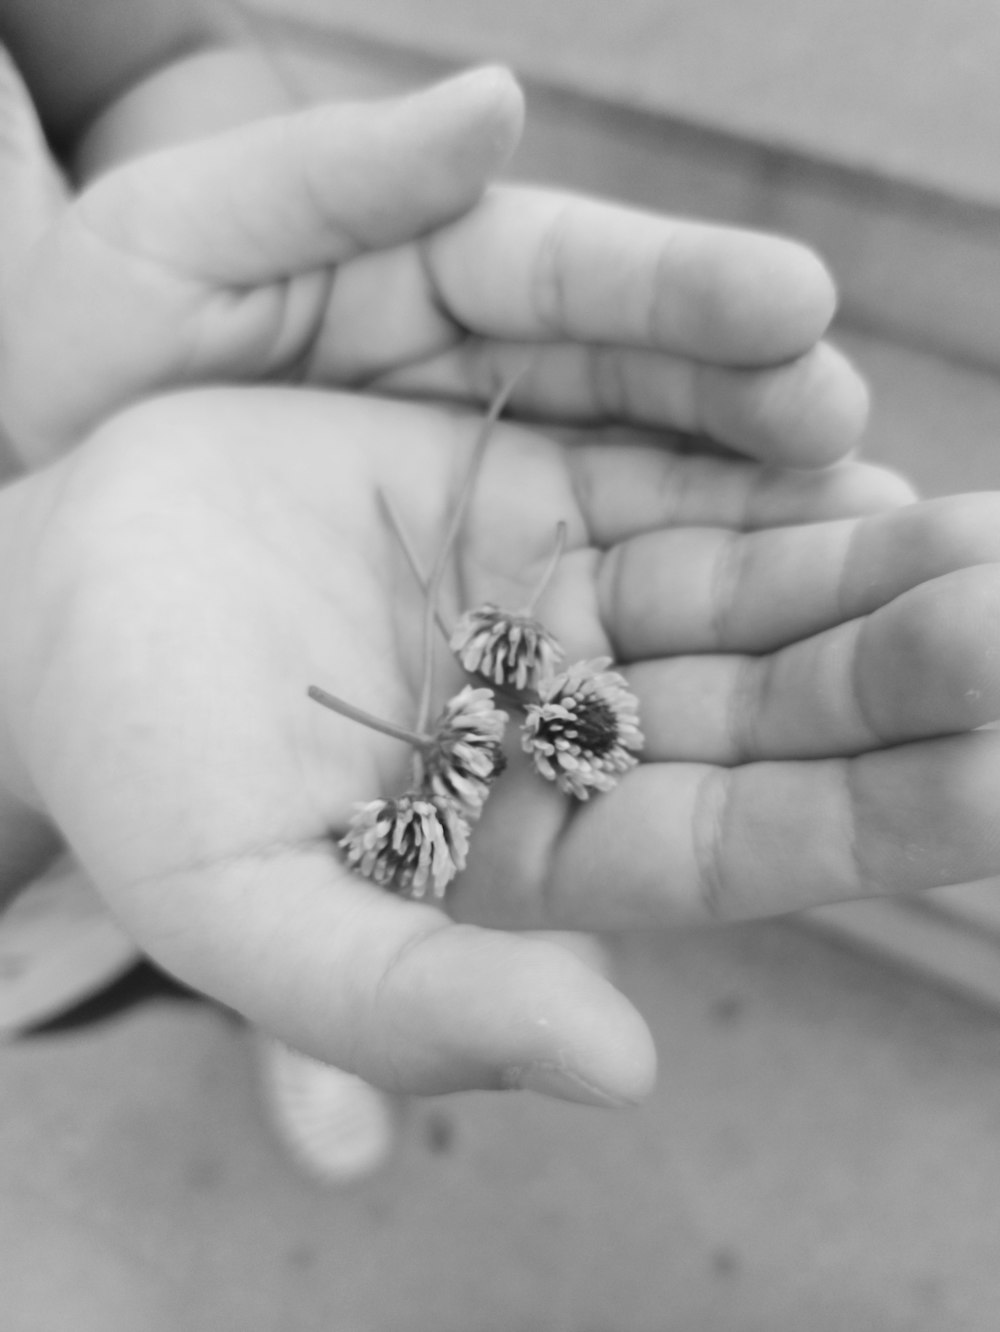 a hand holding a small spider